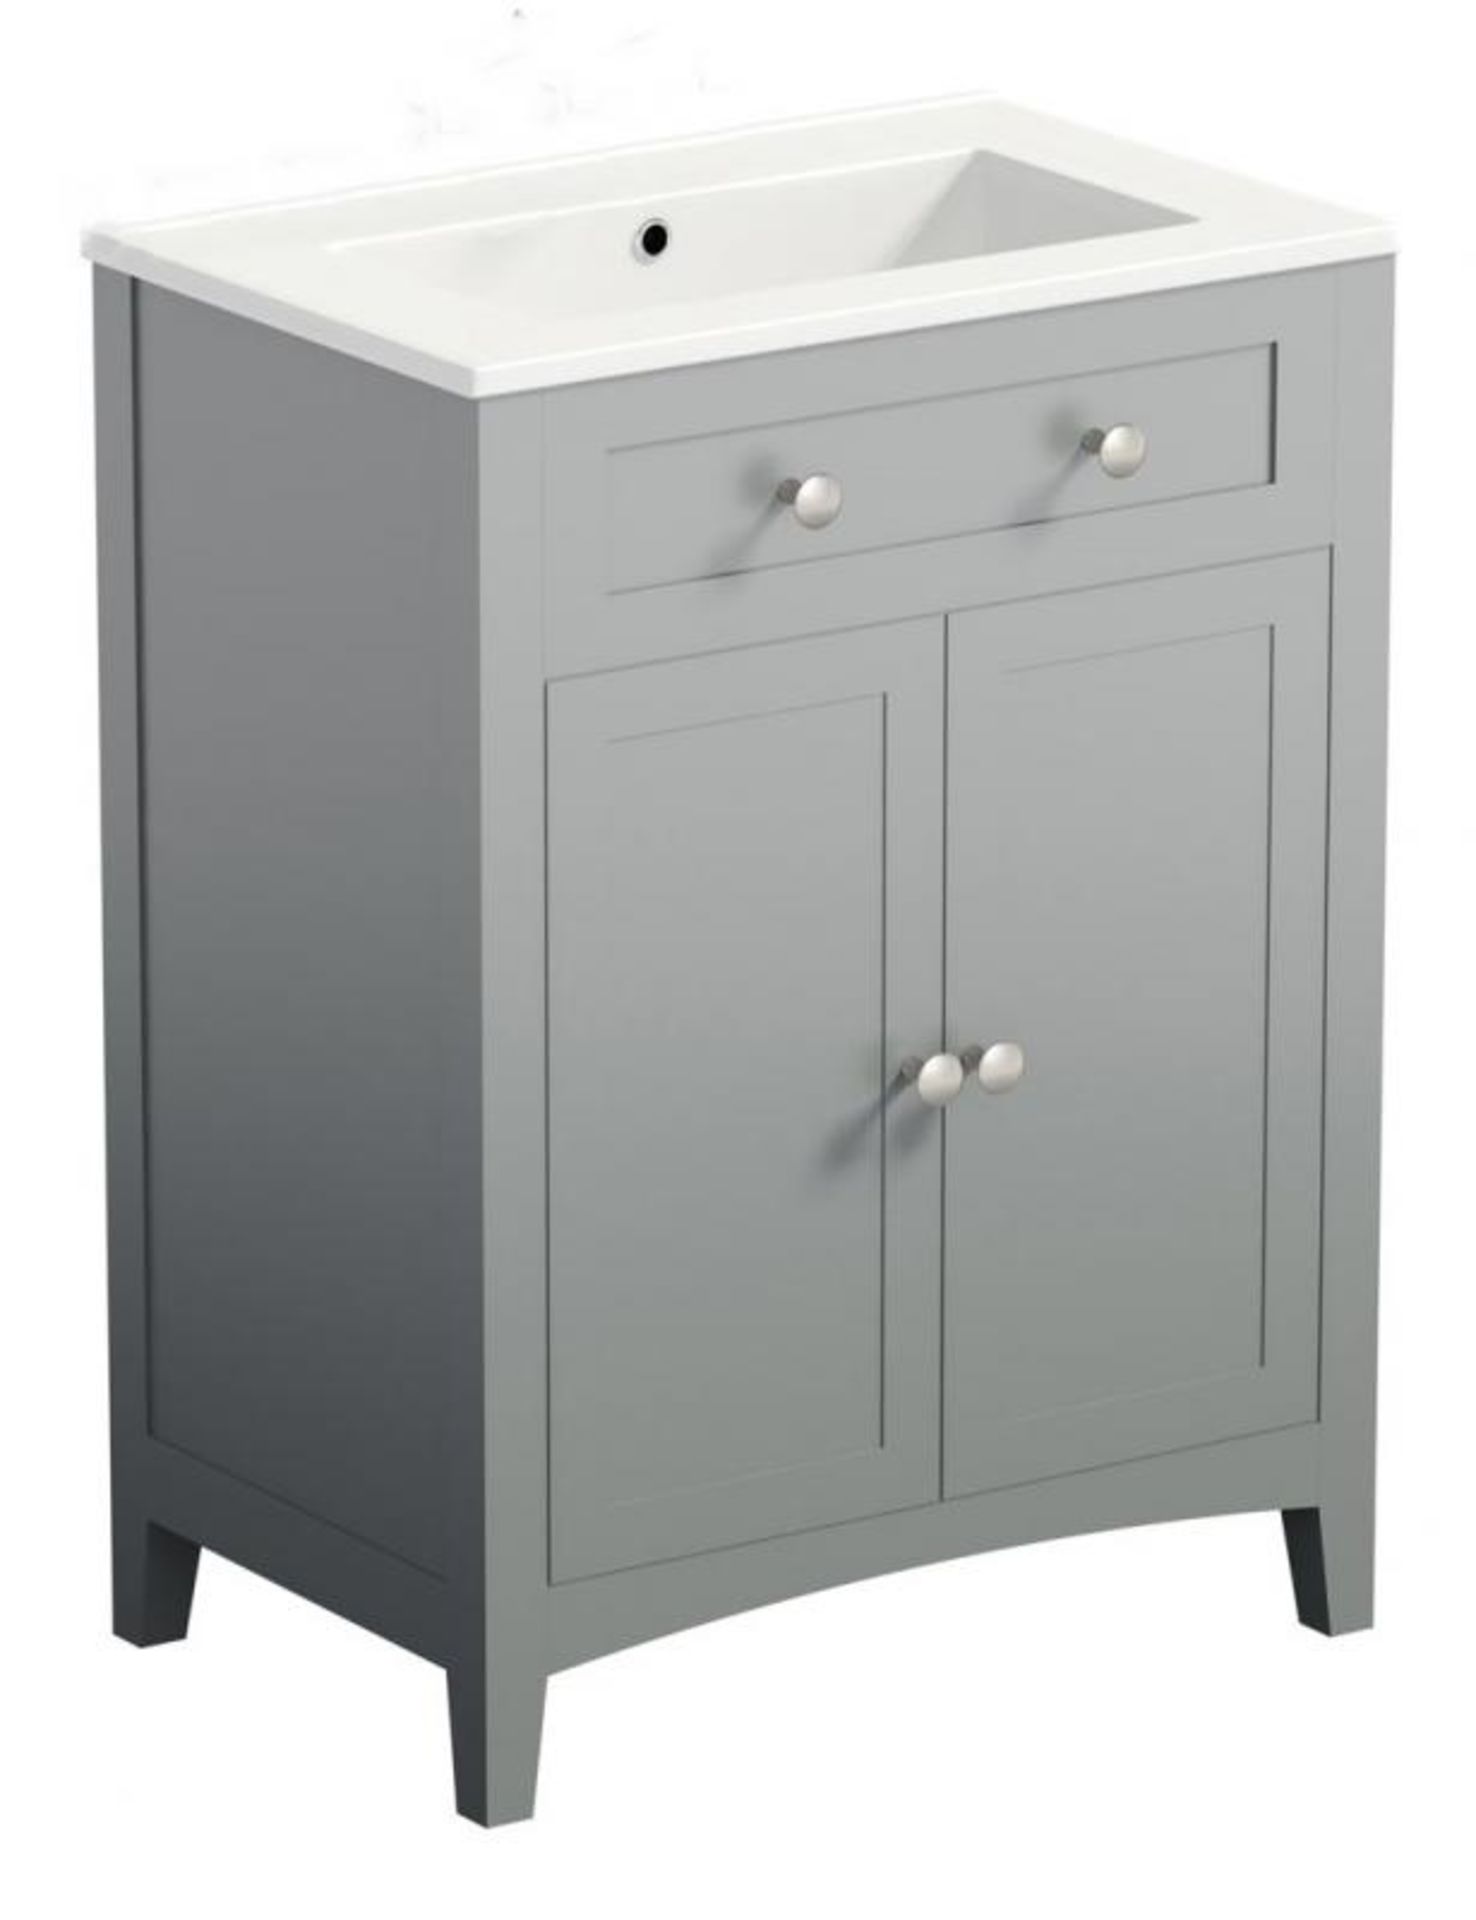 1 x Camberley Grey 600mm Vanity Unit - H800 x W600 x D390mm - Sink Basin Not Included - CL190 -